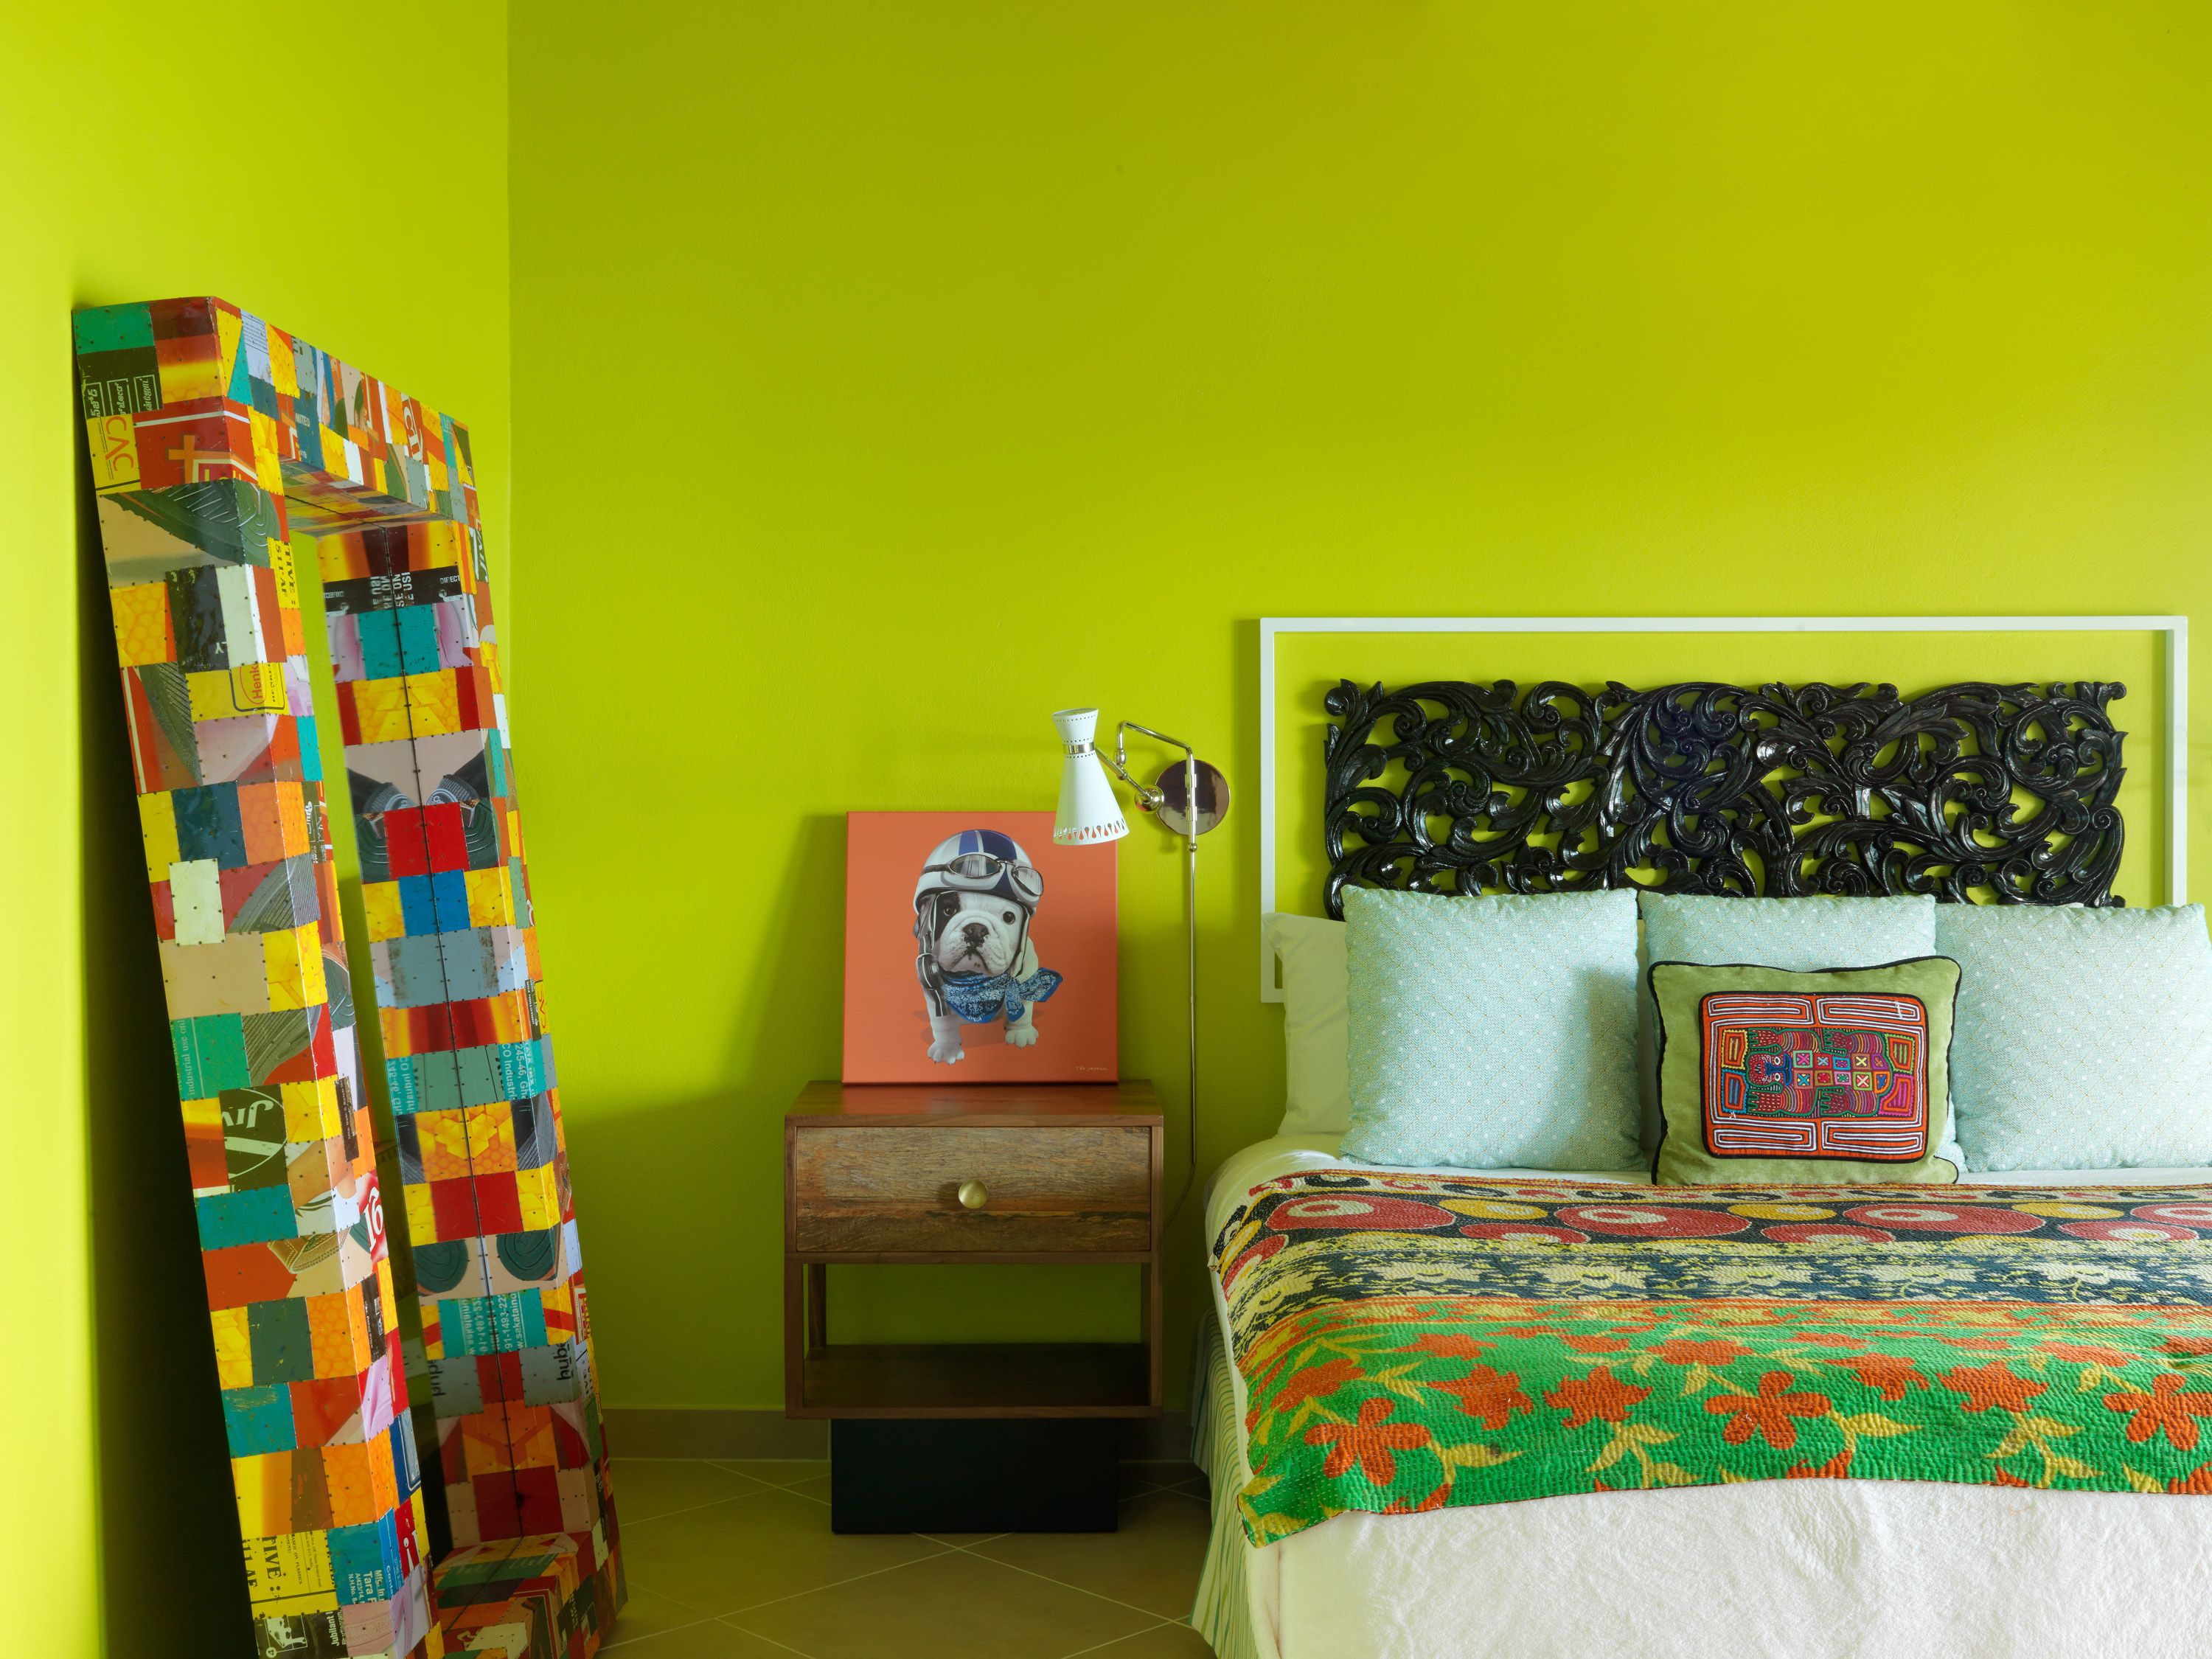 12 Vibrant Room Color Ideas - How to Decorate With Bright Colors